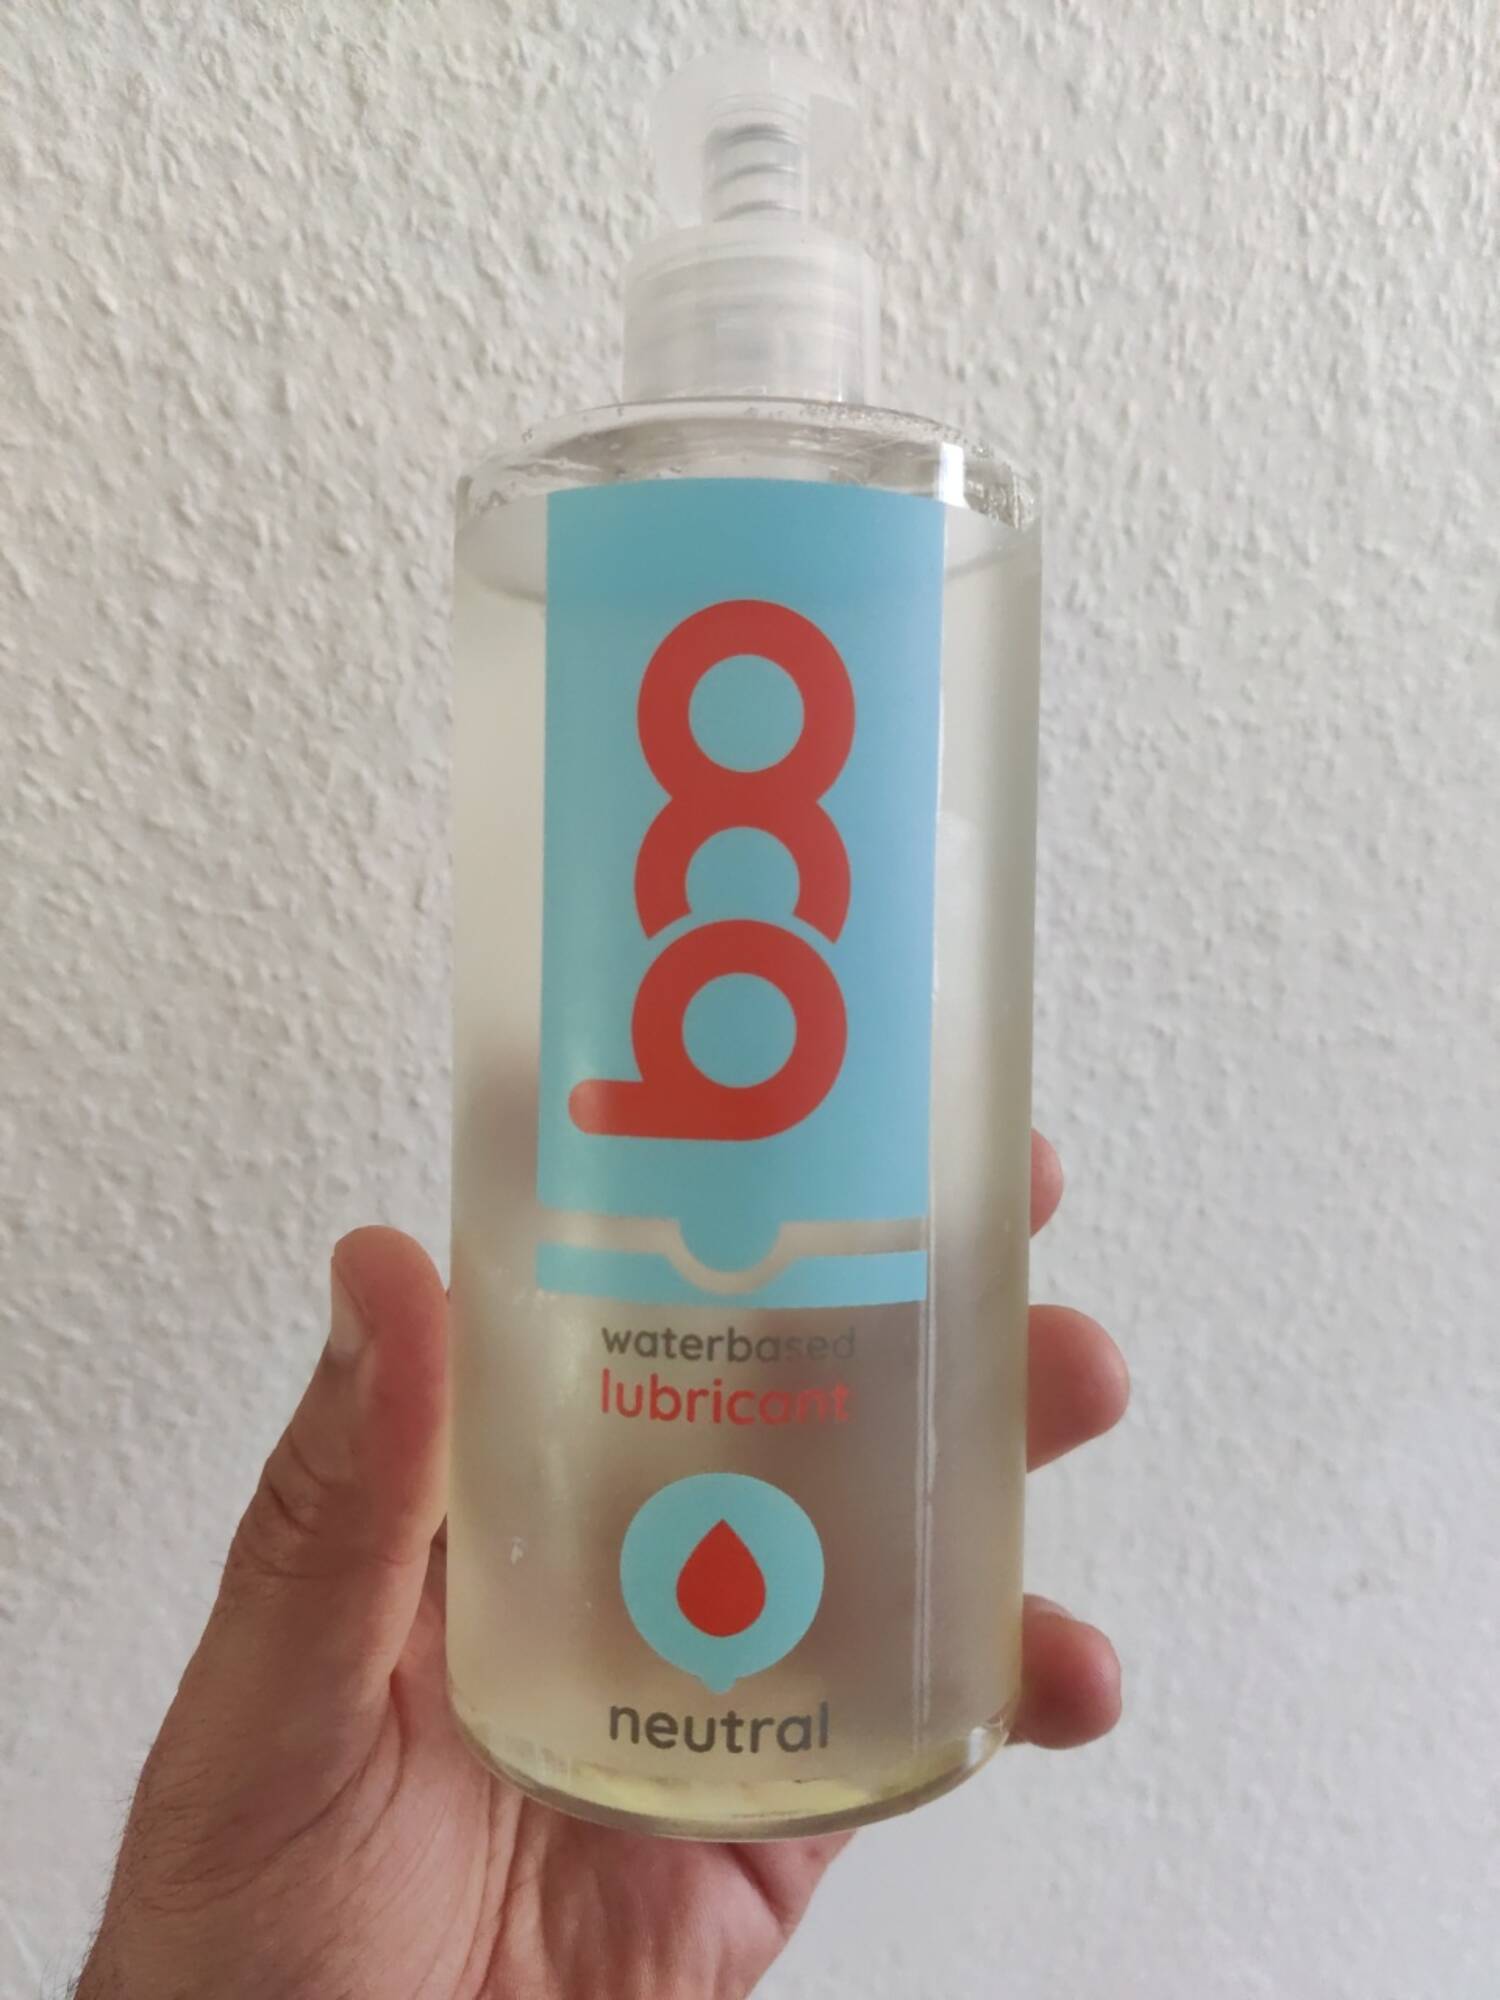 BOO - Neutral - Waterbased lubricant